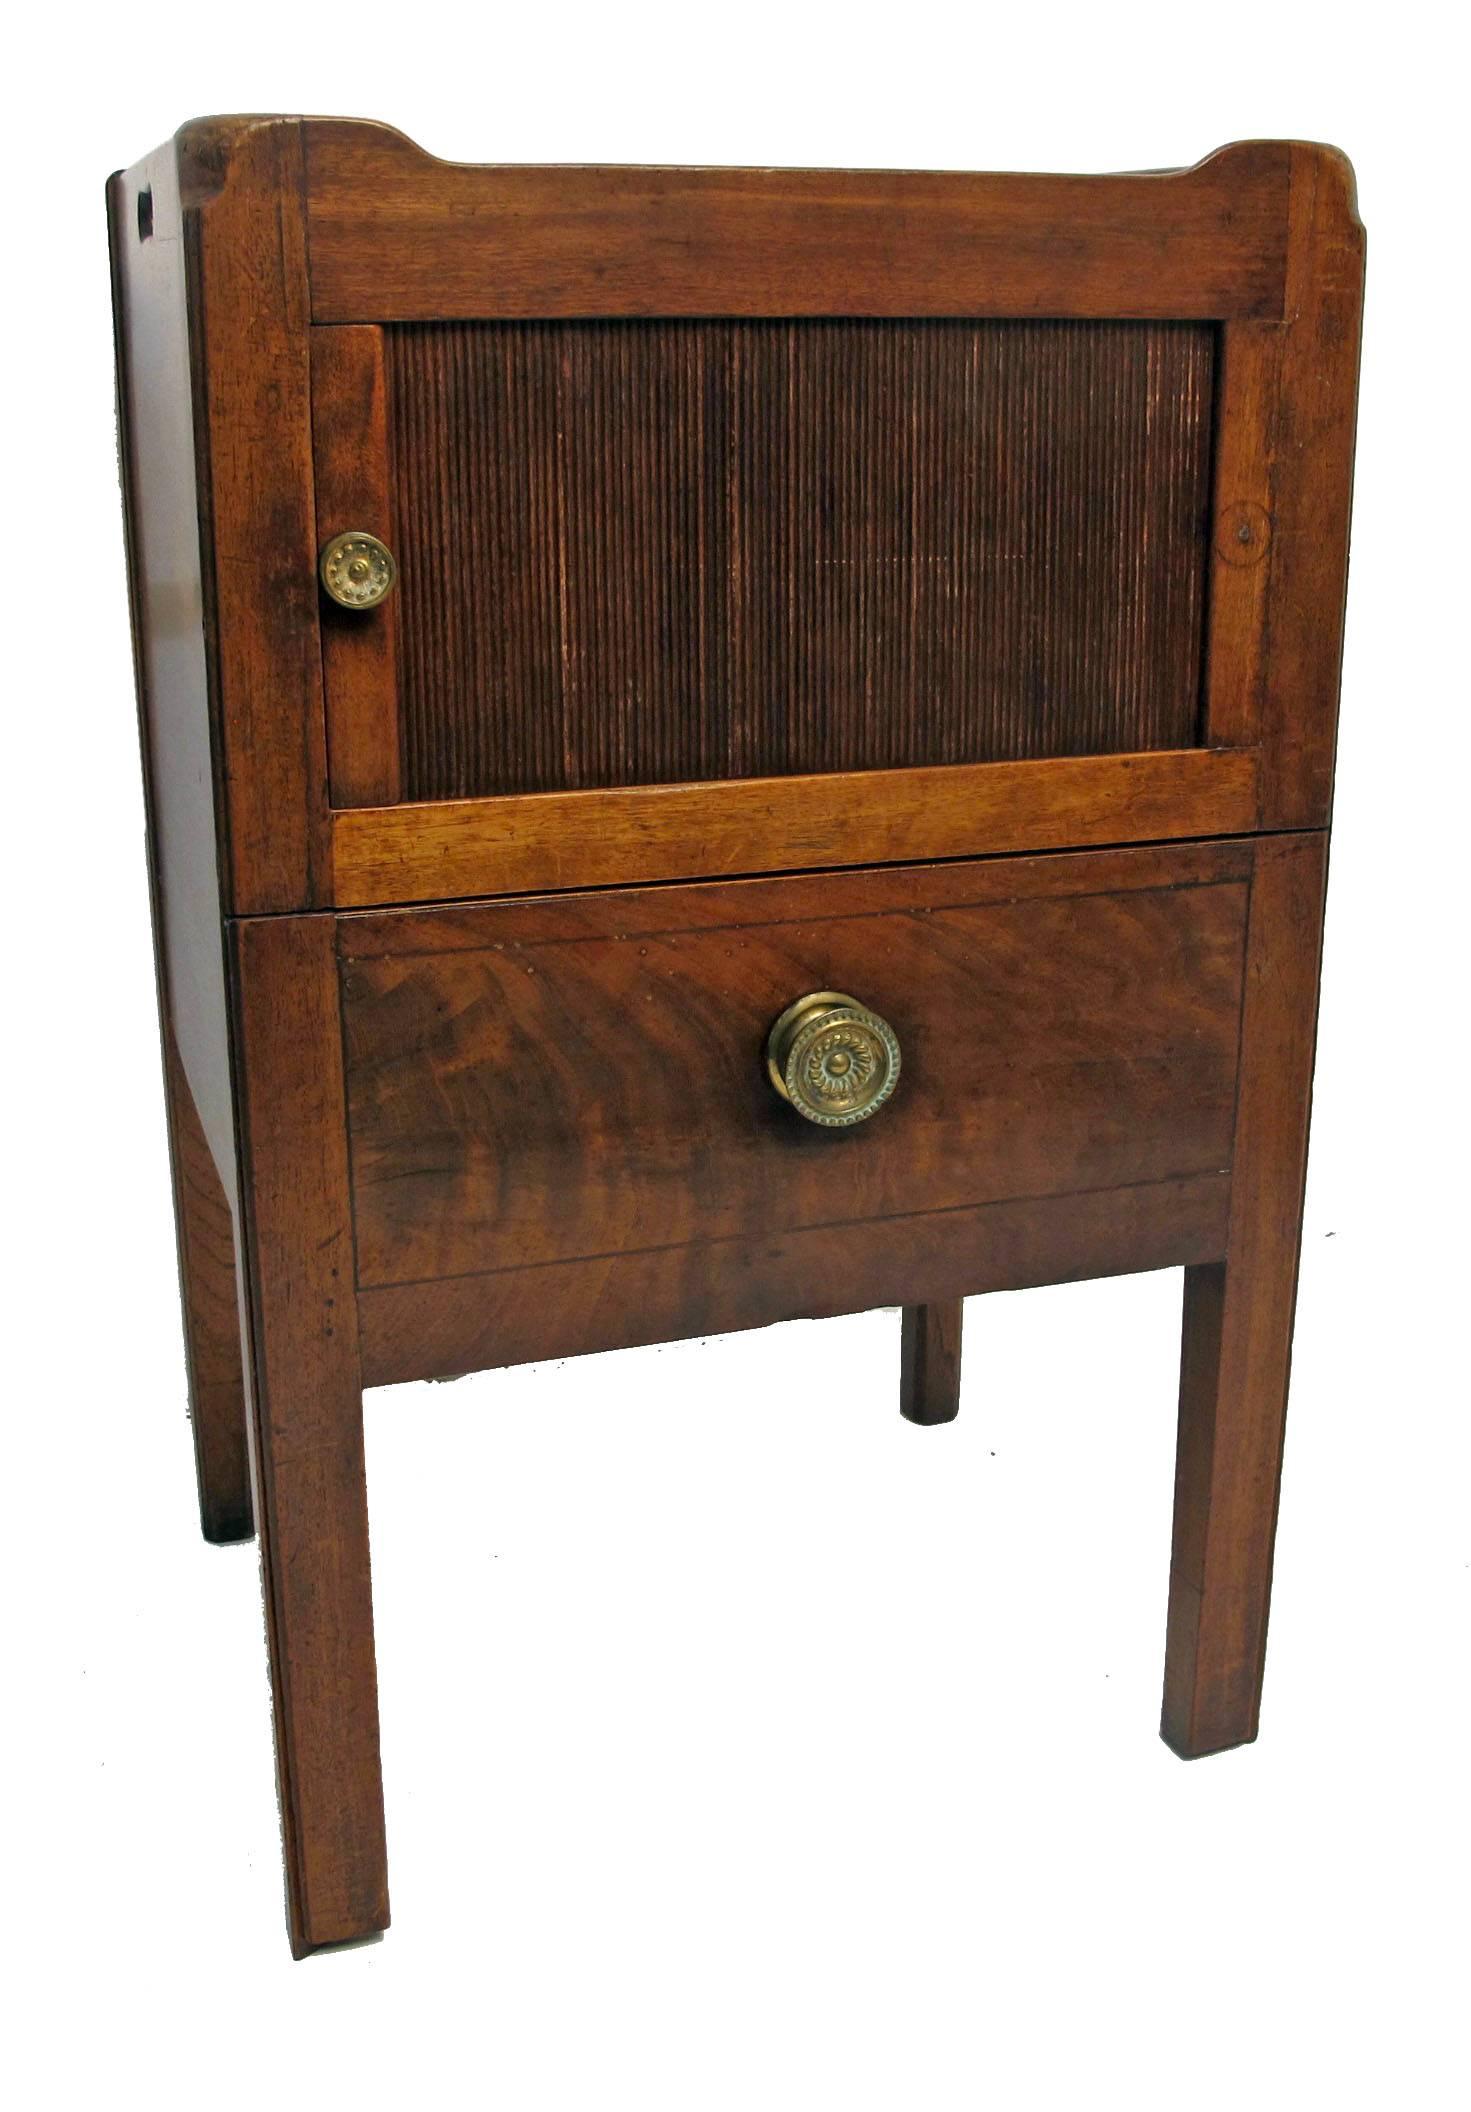 19th century mahogany gentleman's washstand bedside cabinet with wooden gallery and cut-out handles. Sliding tambour door above a single deep drawer, standing on four square legs, England, circa 1830.